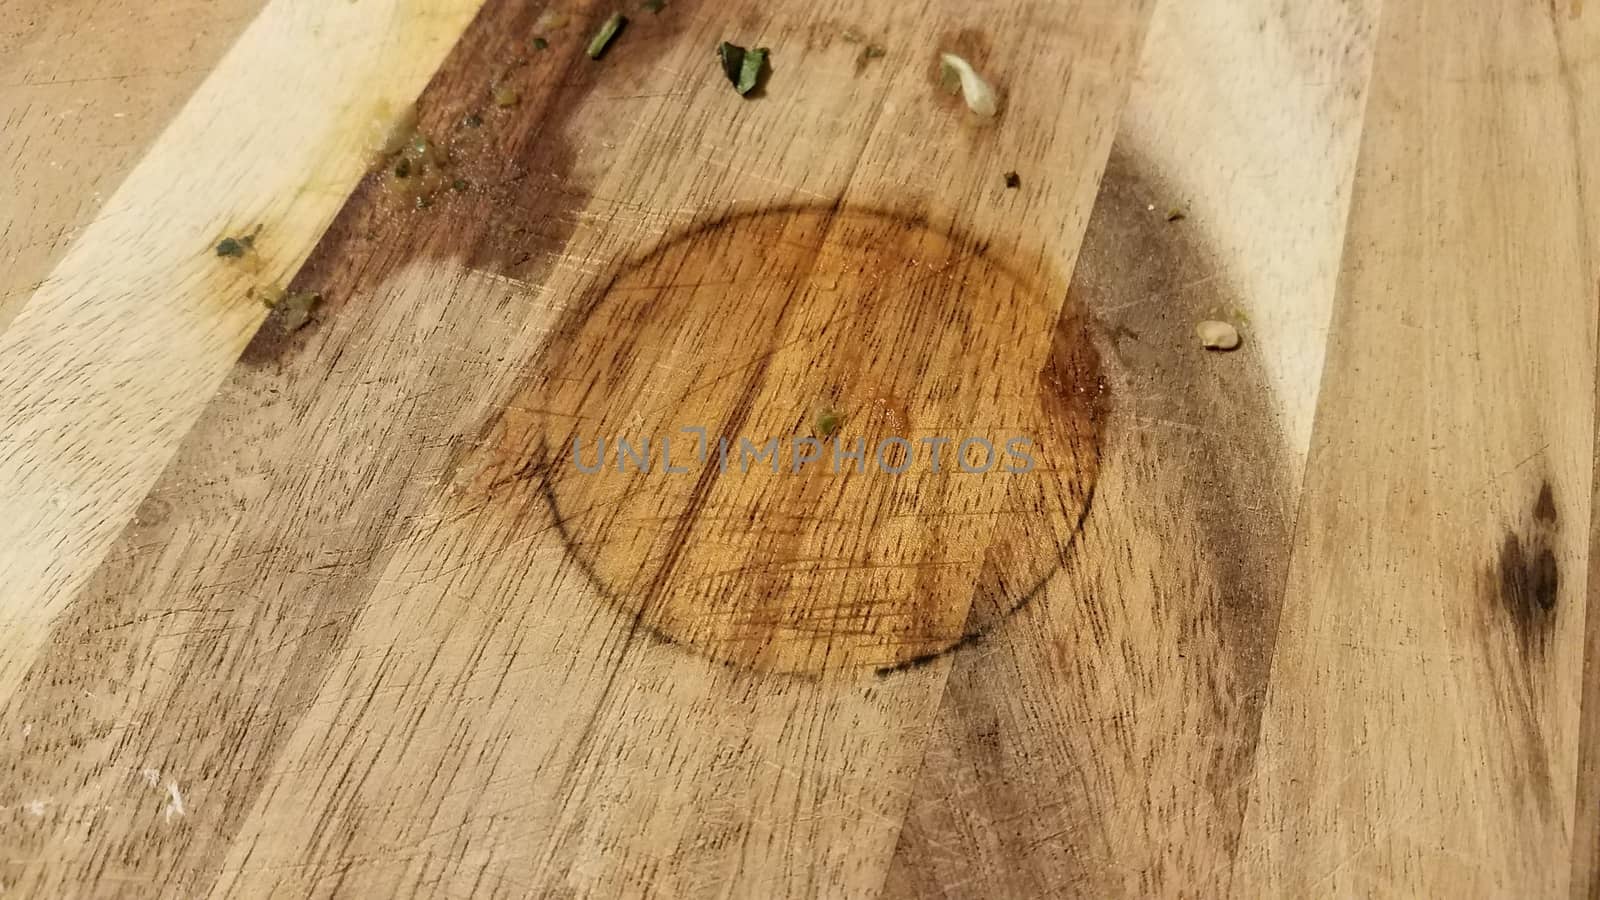 dirty wood cutting board with bits of food and circular stain